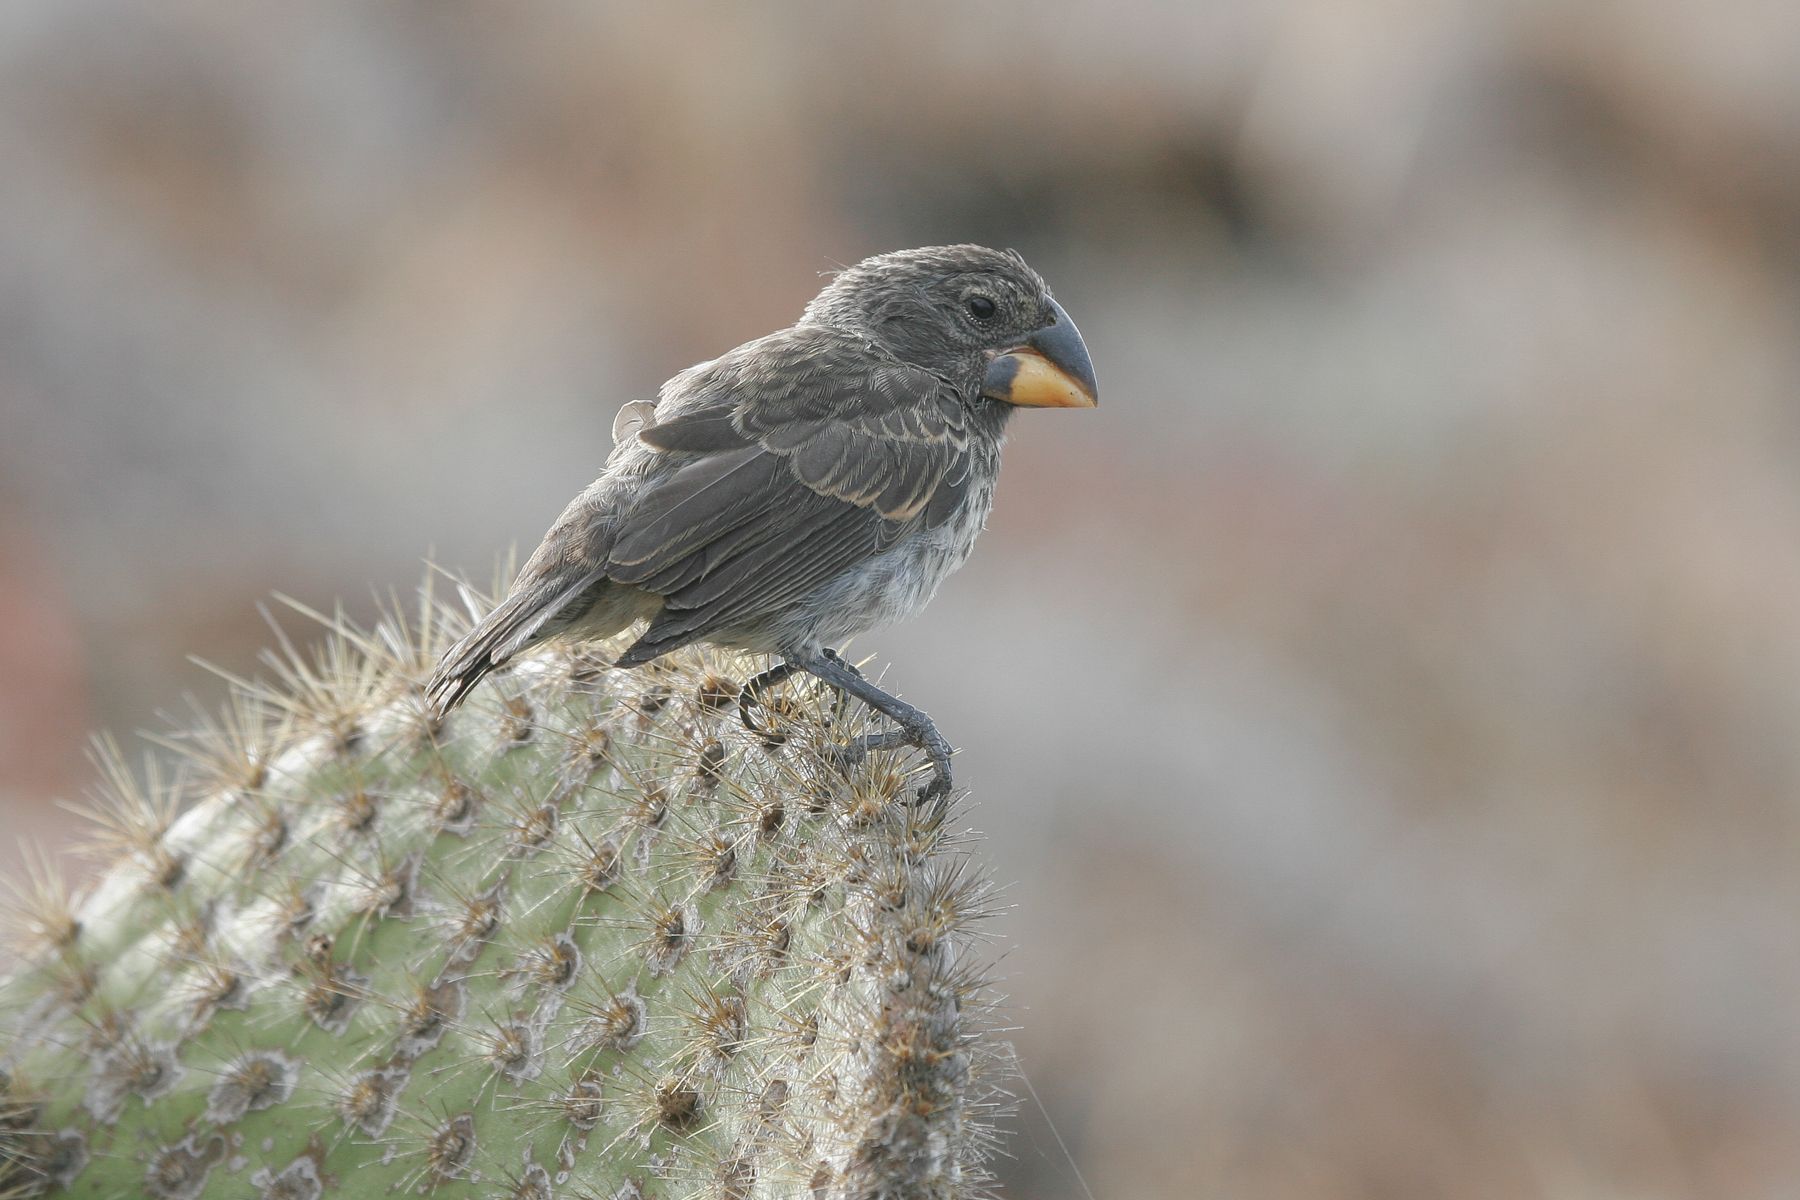 A female Large Ground Finch, one of a large series of 'Darwin's Finches' species that have shown remarkable adaptive radiation on the Galapagos islands